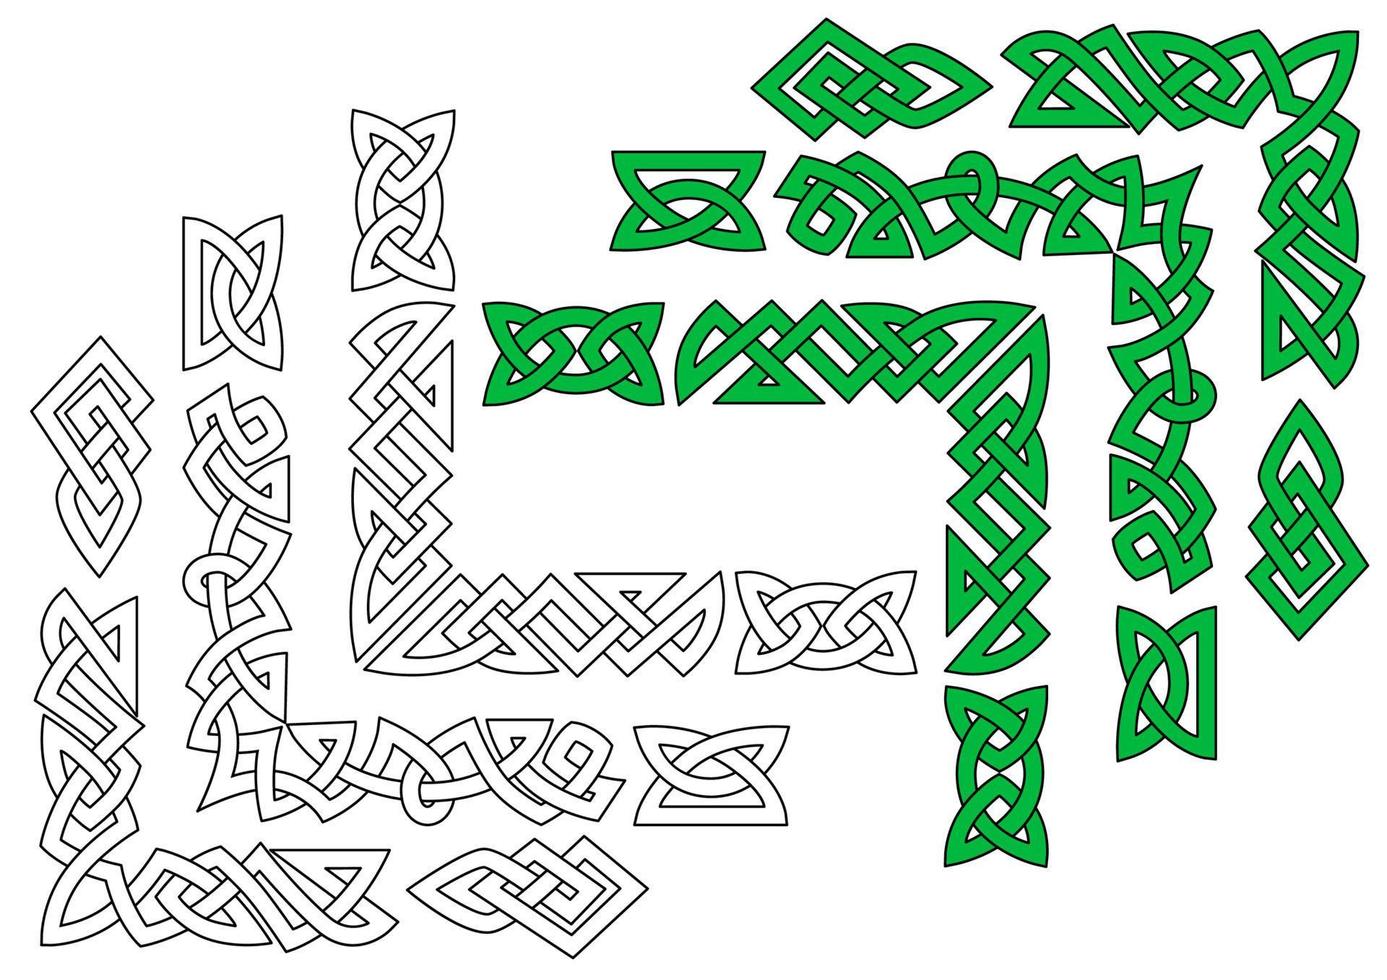 Borders and patterns in celtic style vector